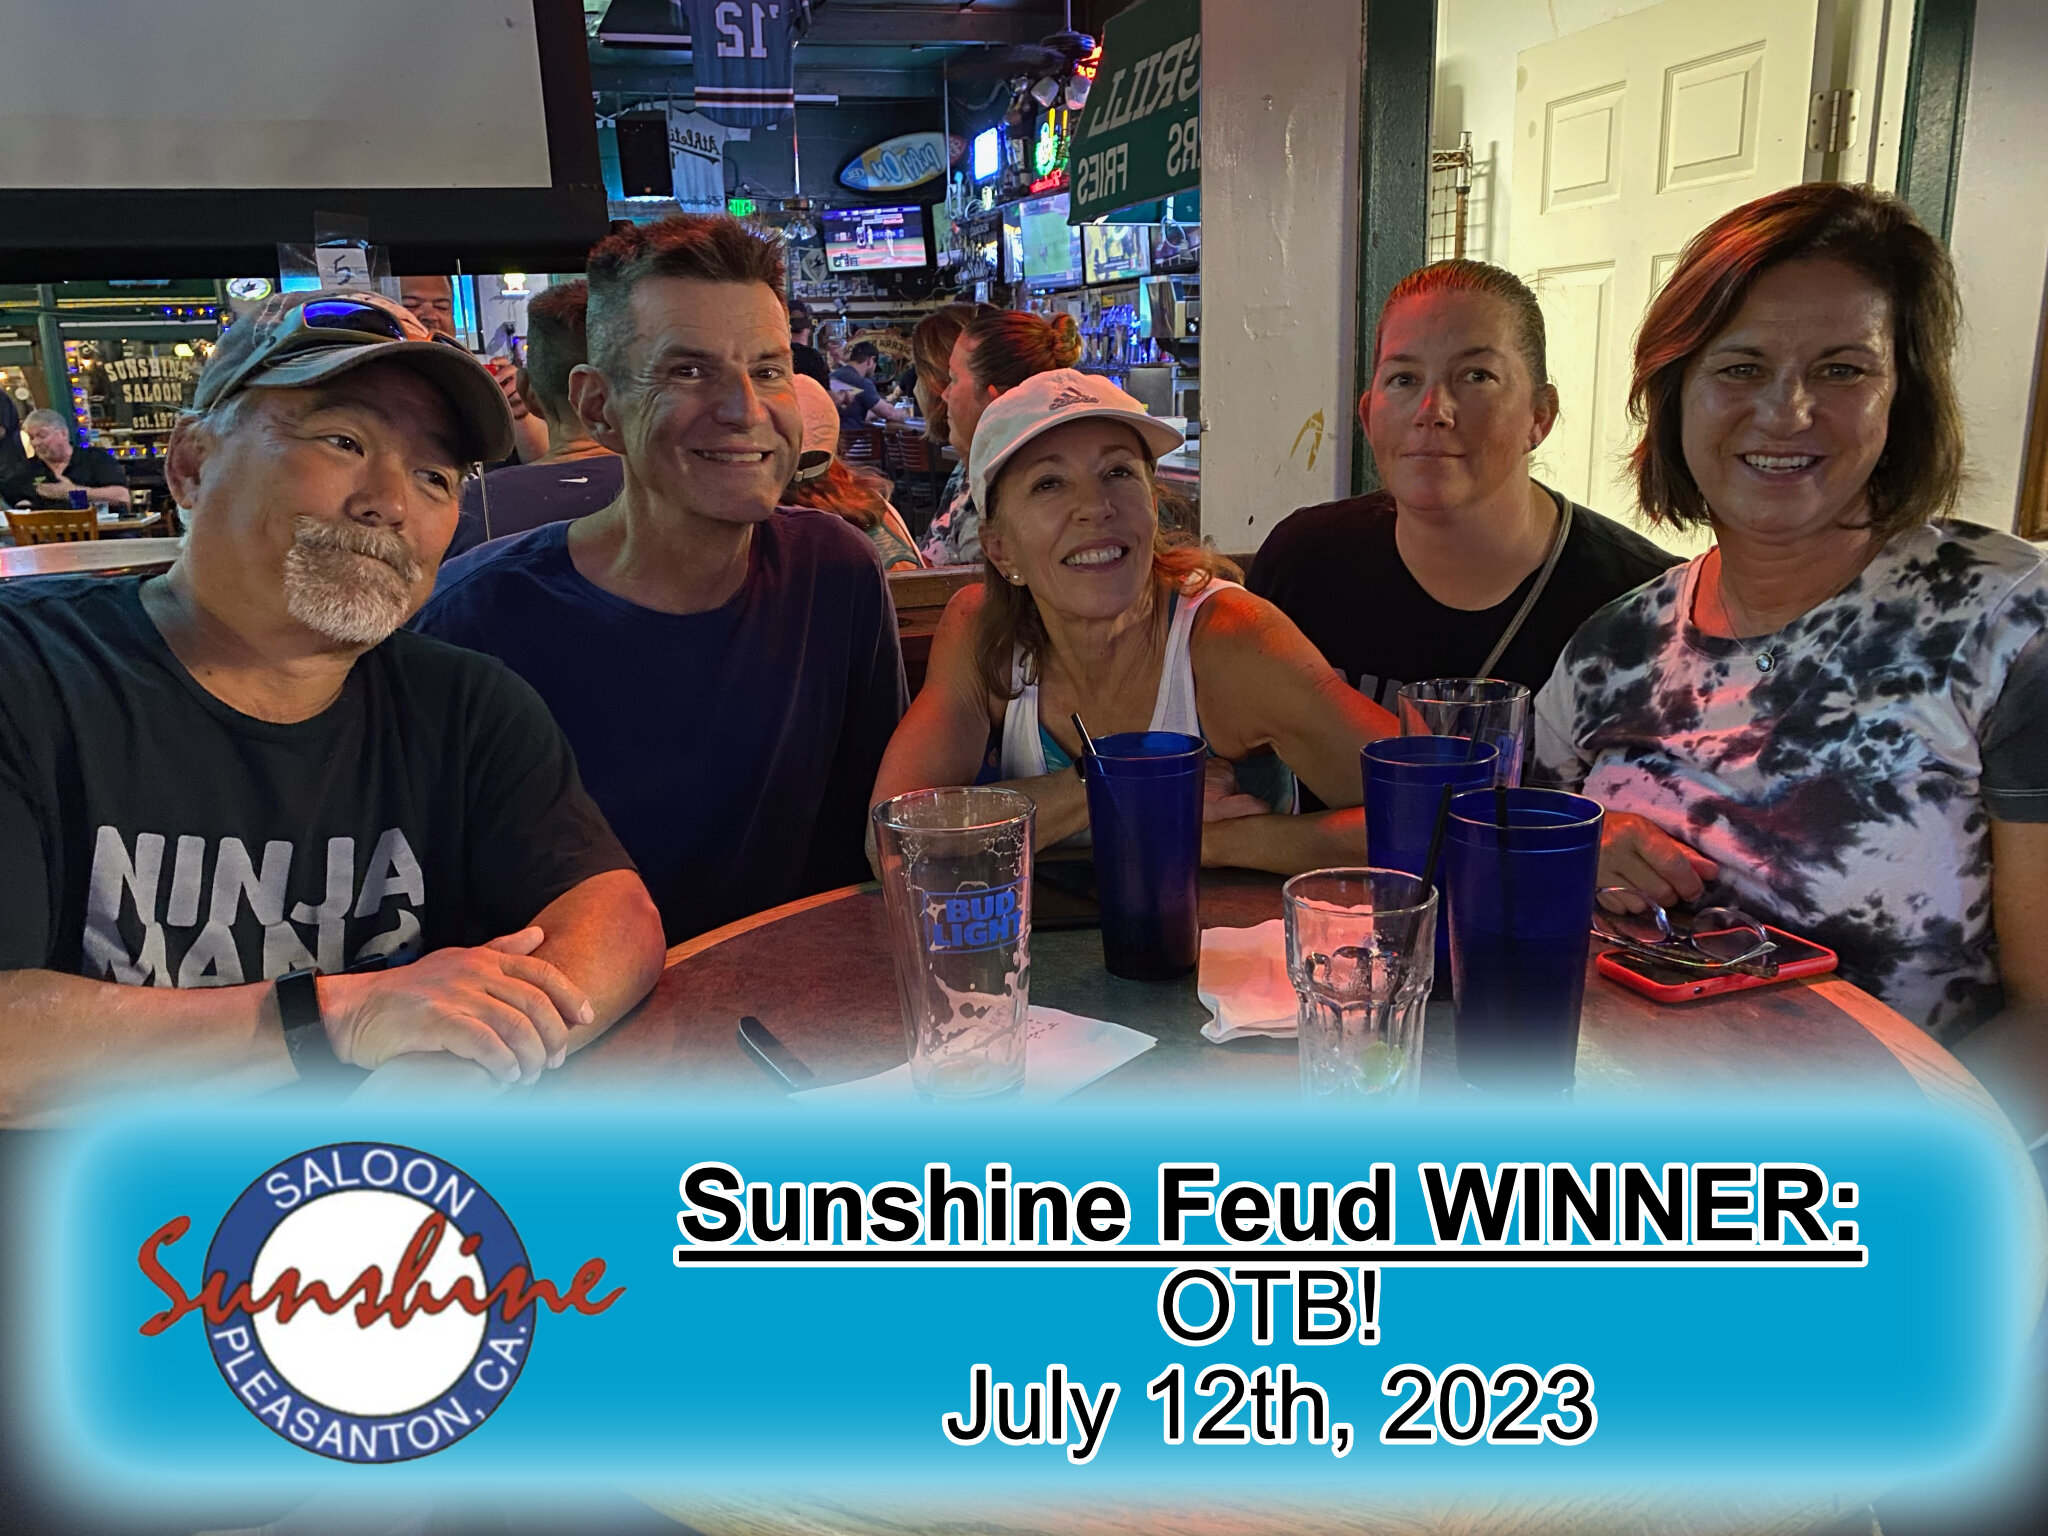 Congratulations to our Sunshine Feud trivia winners last Wednesday: OTB! 
Come out TONIGHT for your chance to win our family feud style trivia night here at #Sunshinesaloon!